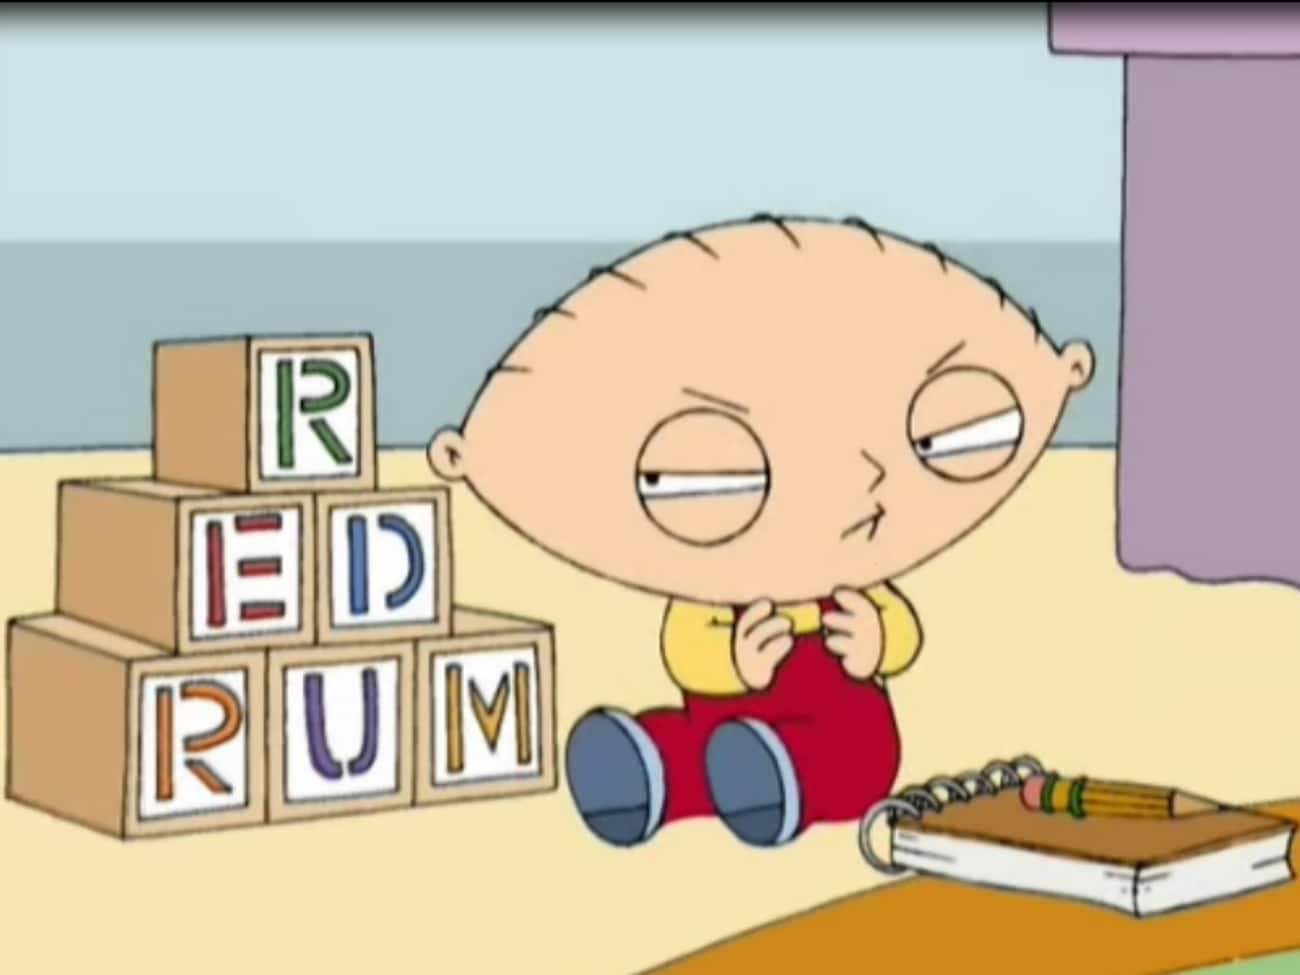 All Work and No Play Makes Stewie a Dull Boy